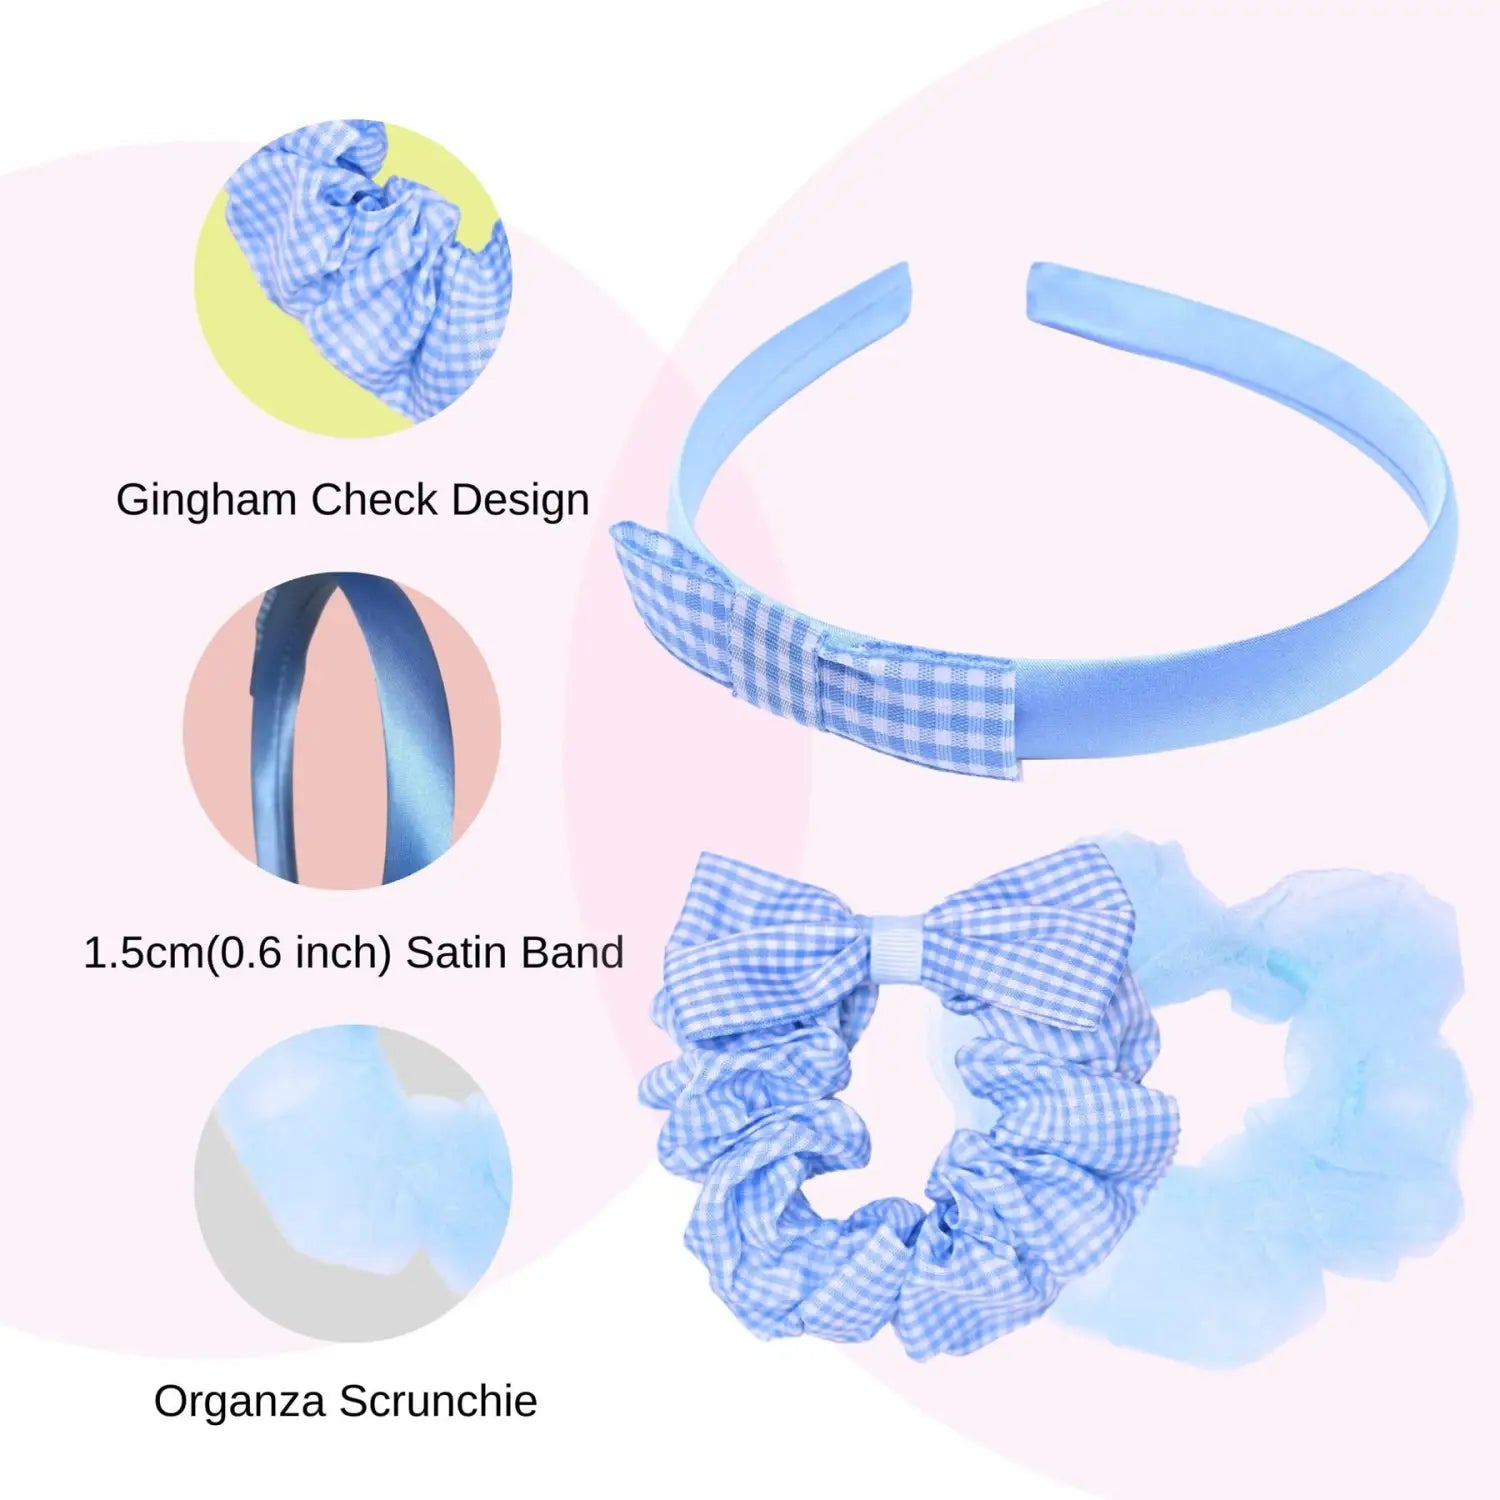 Blue and White Gingham Check Headband with Bow - Girls Hair Accessories Set